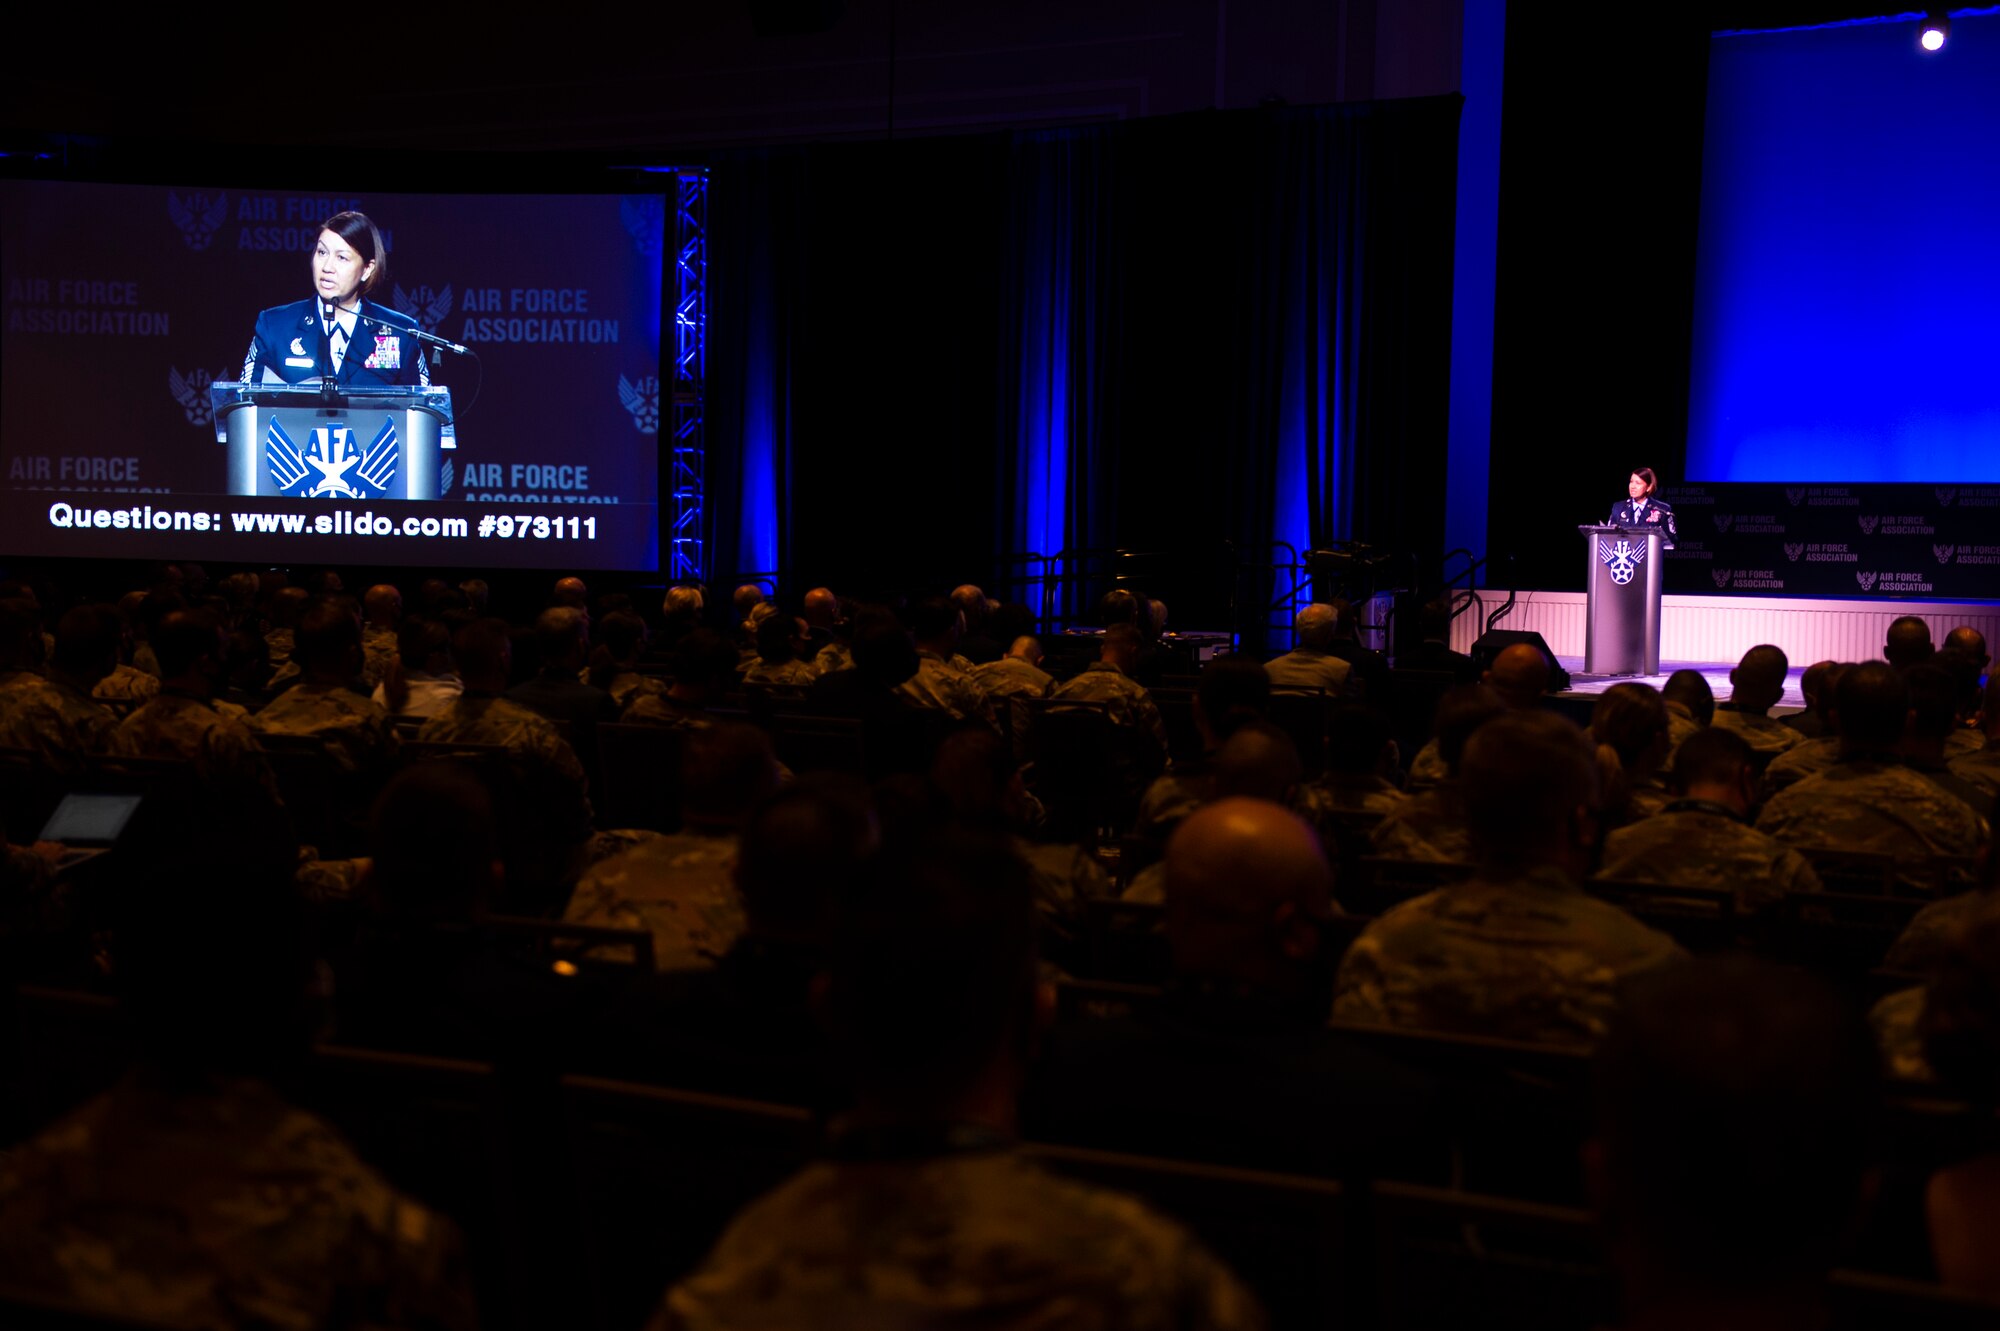 Chief Master Sgt. of the Air Force JoAnne S. Bass delivers remarks and recognizes the 12 Outstanding Airmen of the Year during the 2021 Air Force Association Air, Space and Cyber Conference in National Harbor, Md., Sept. 20, 2021.